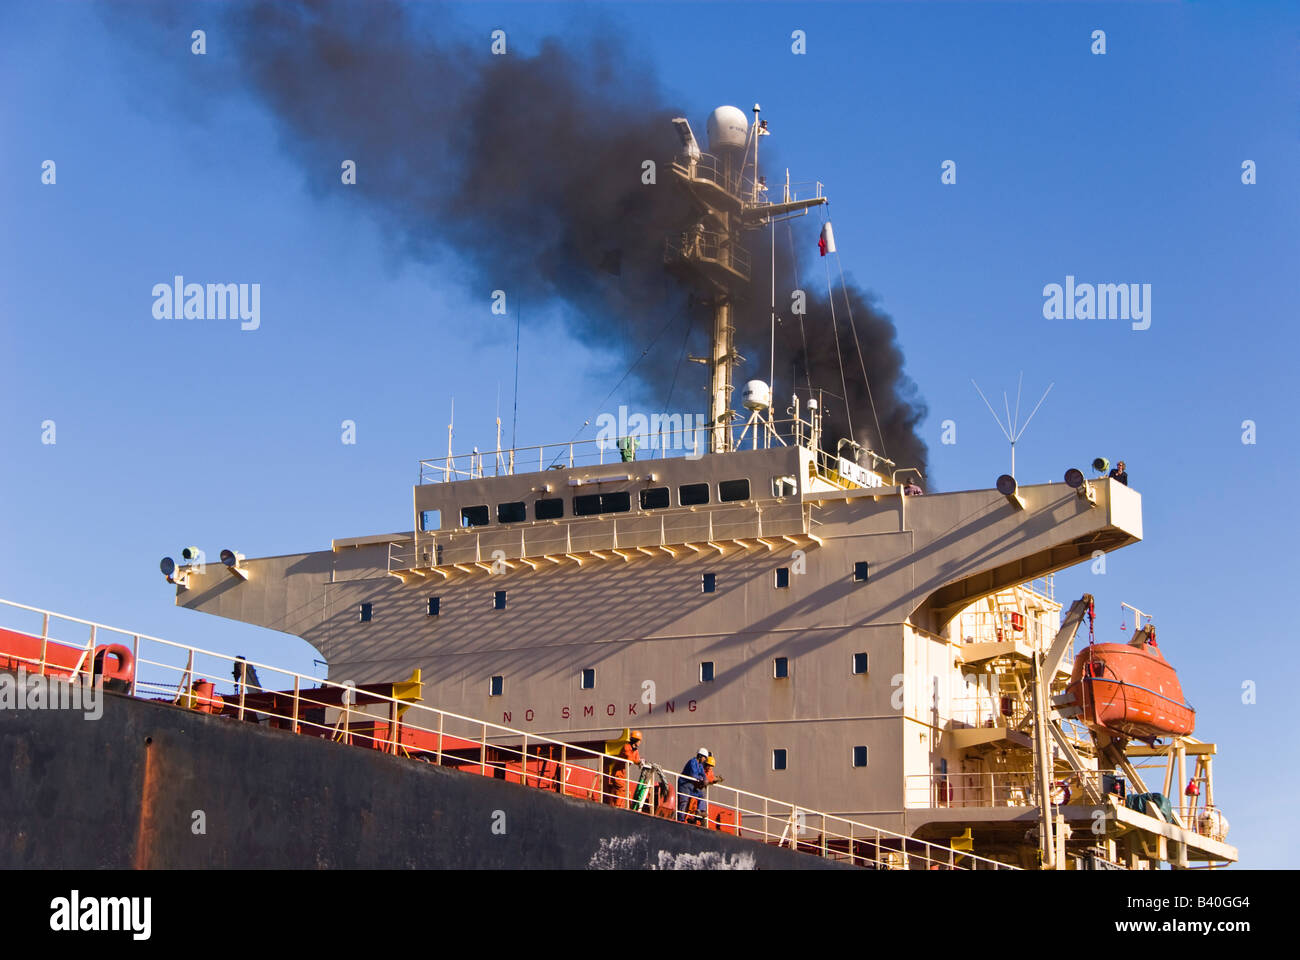 Black smoke rises from ship's funnel as the ship approaches the quay. Stock Photo